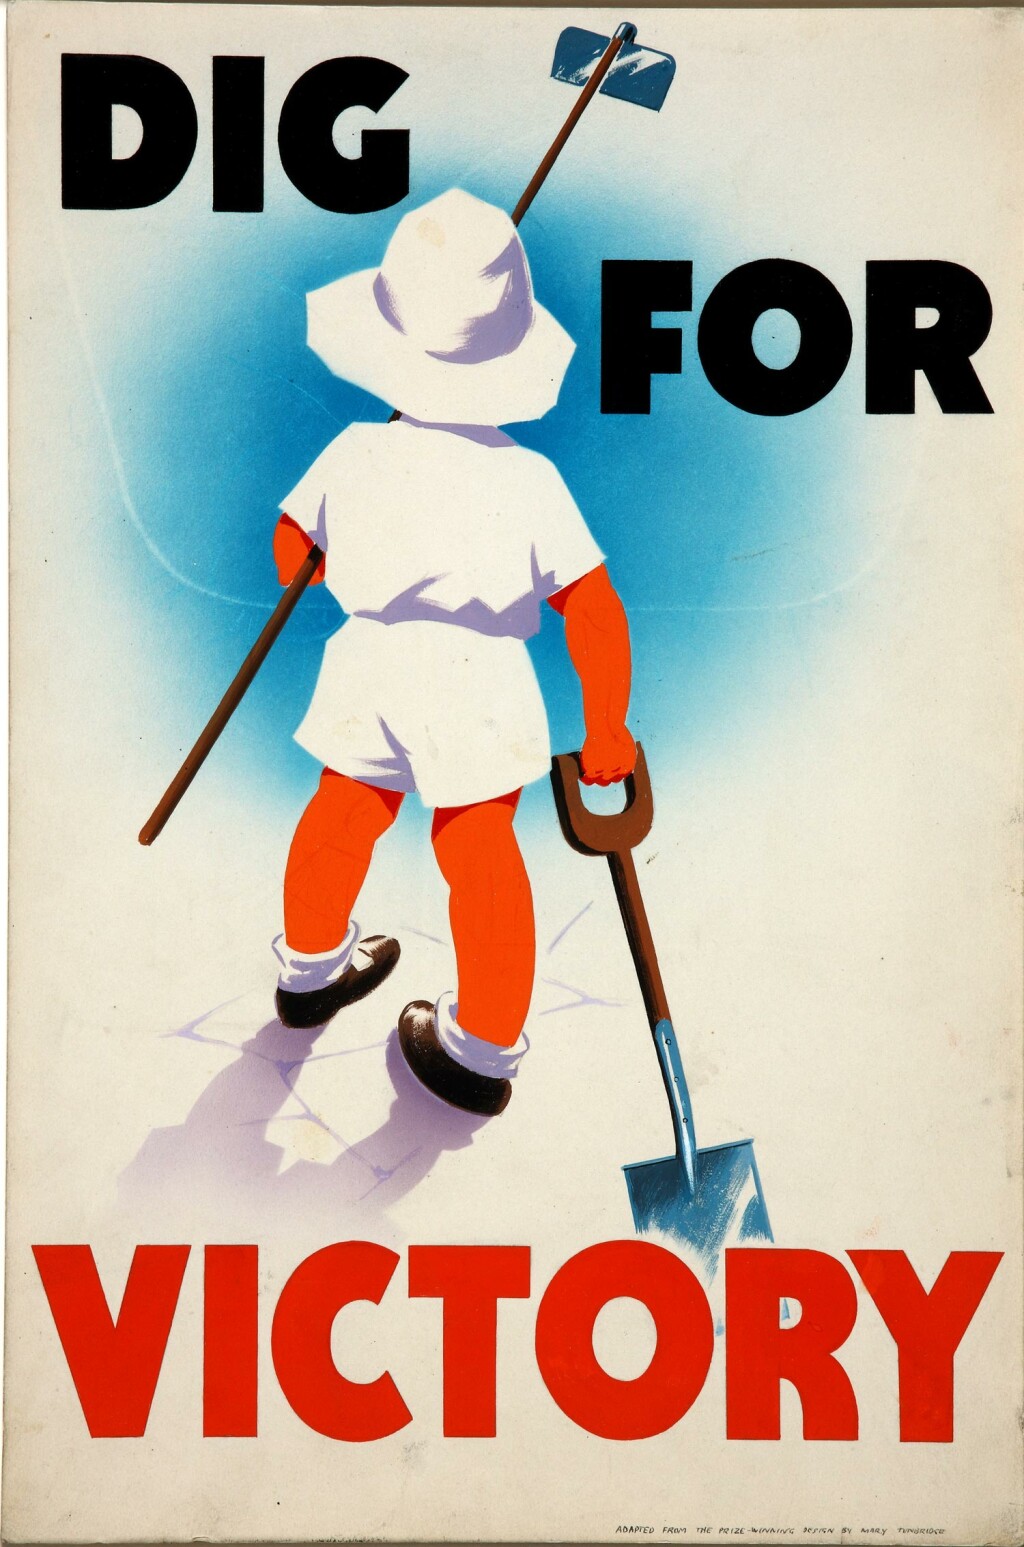 Dig for Victory, by Mary Tunbridge